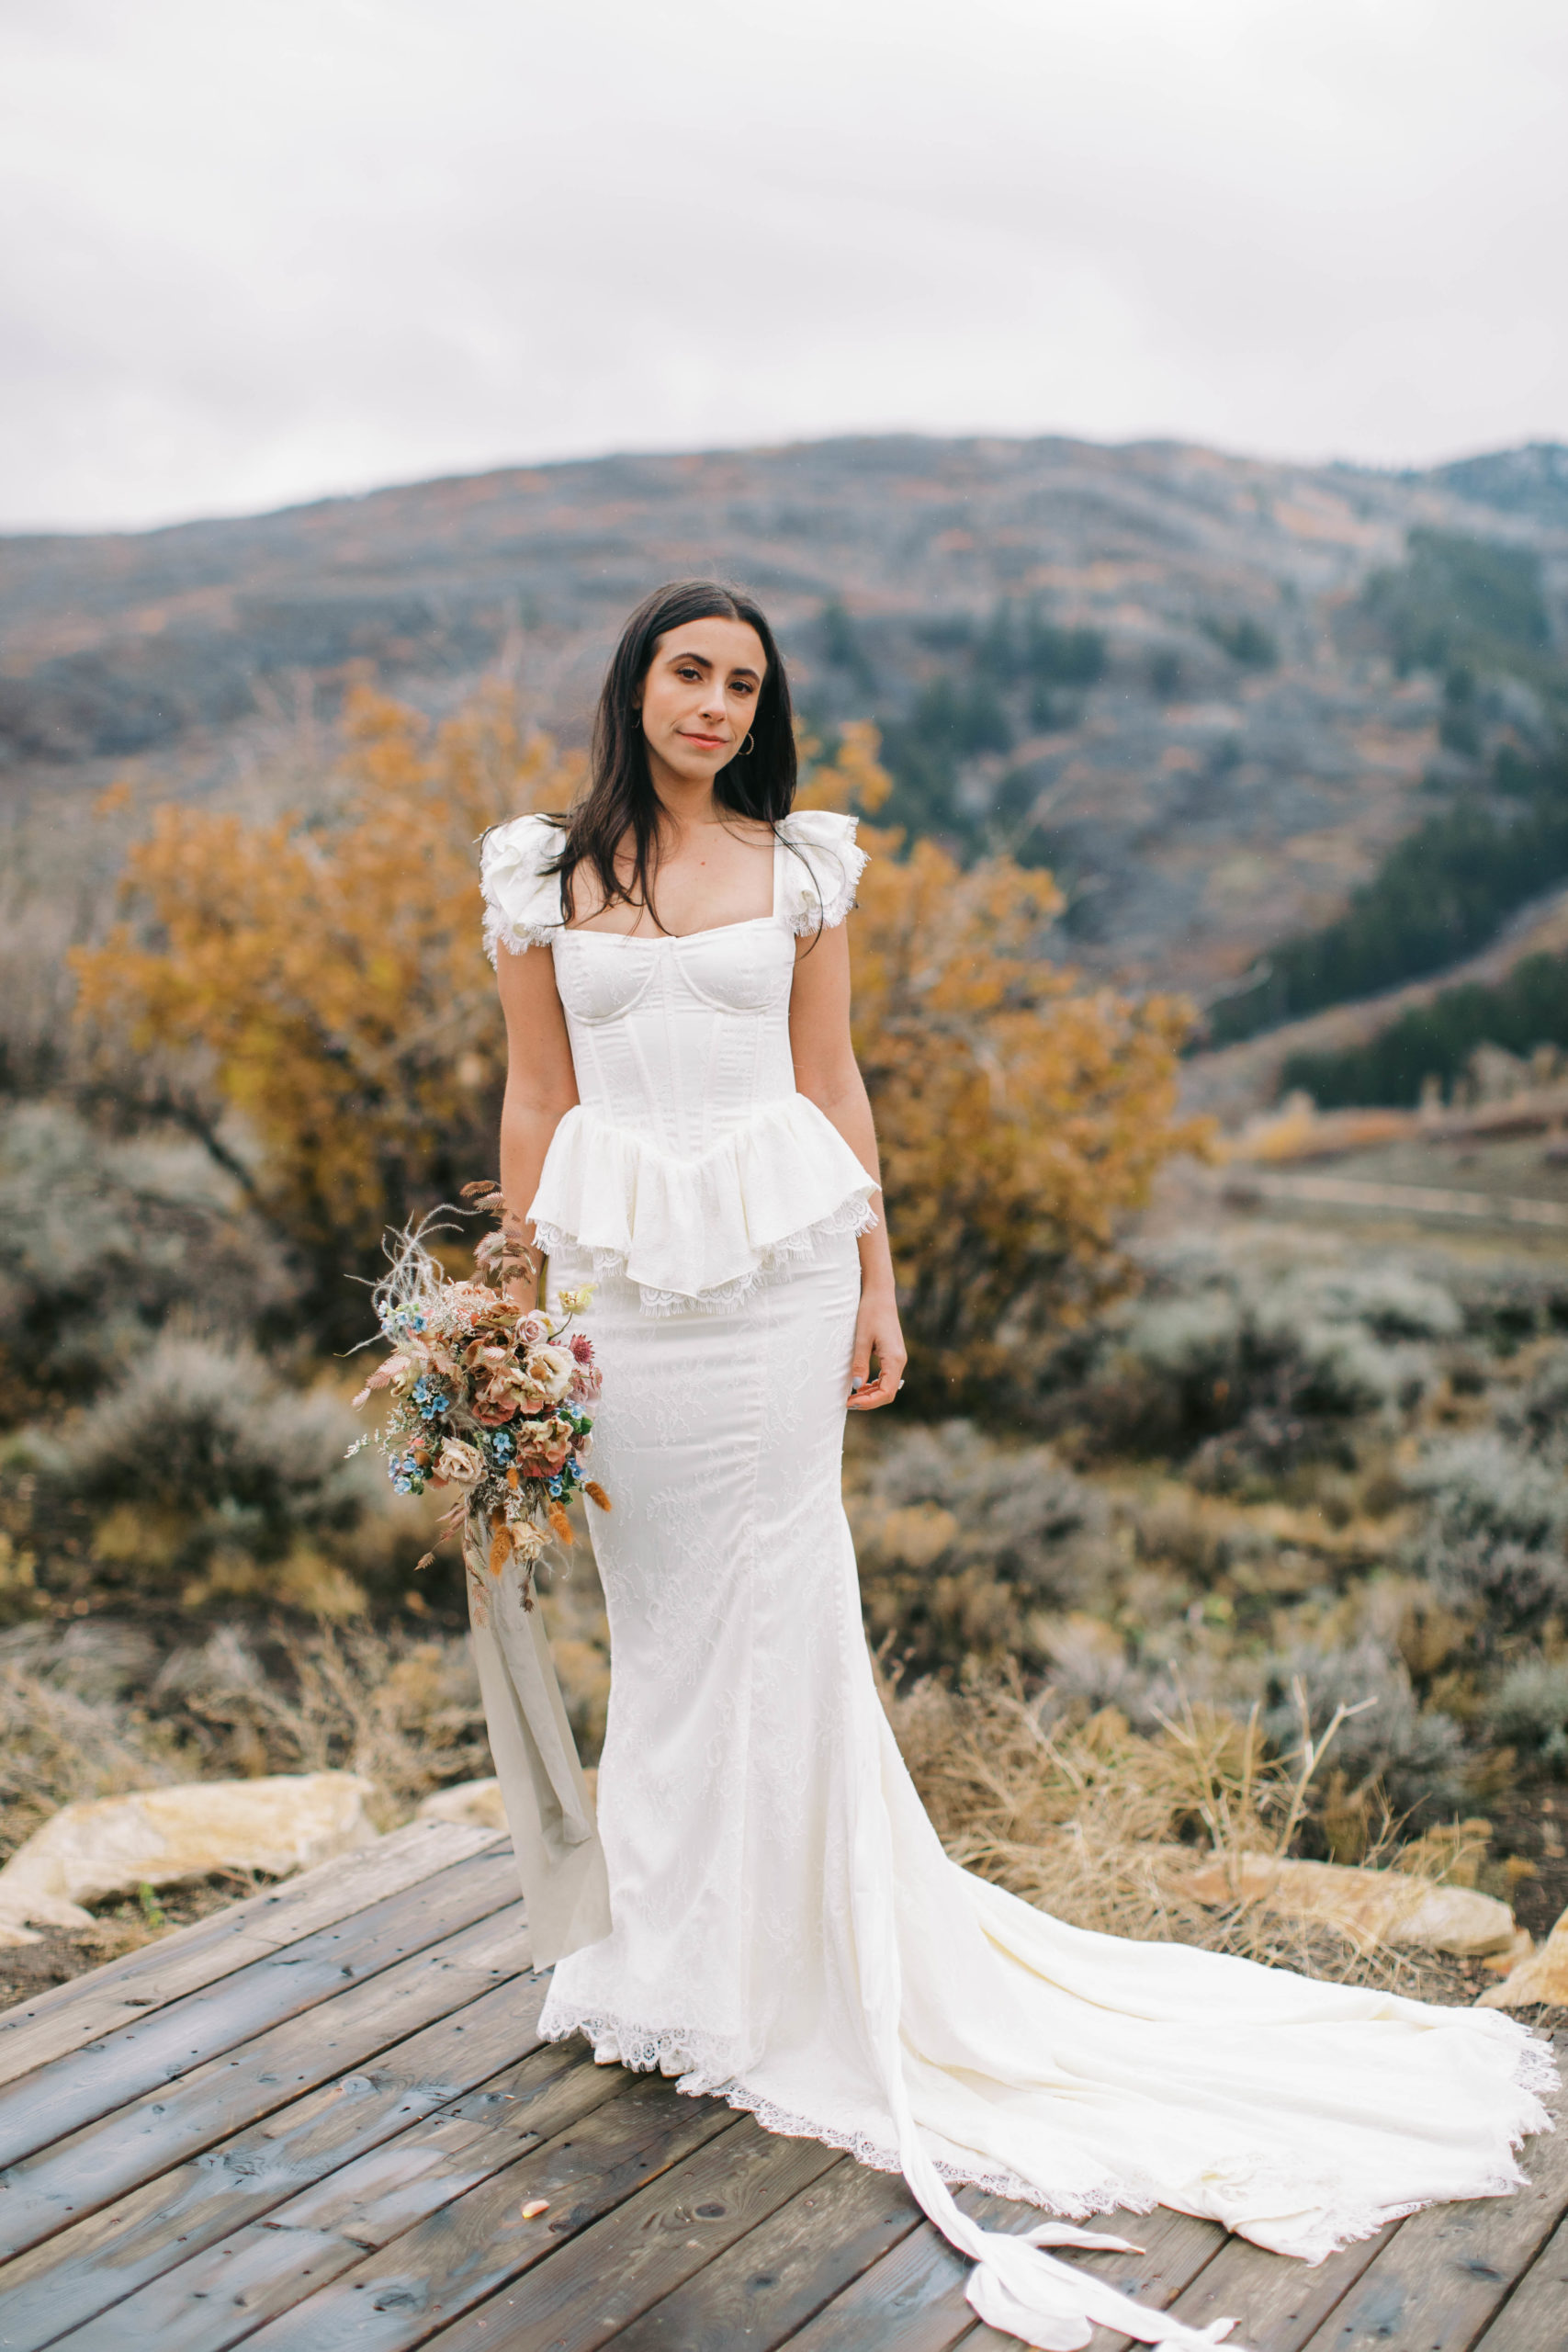 a bride wears a custom vintage wedding dress and carries a unique wedding bouquet at her eclectic ranch wedding in utah